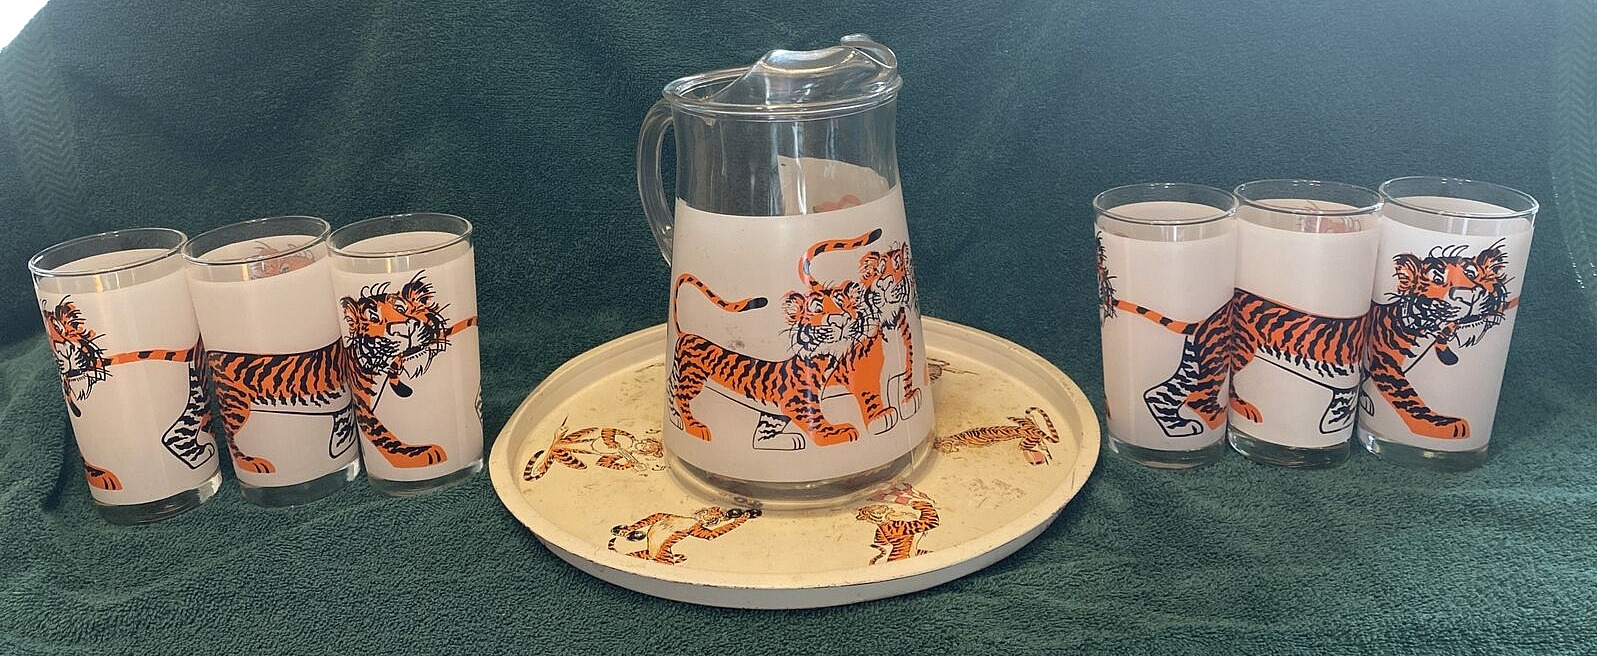 Vintage 1960s Esso Exxon Tiger in your Tank, Pitcher, Six Glasses and Tray